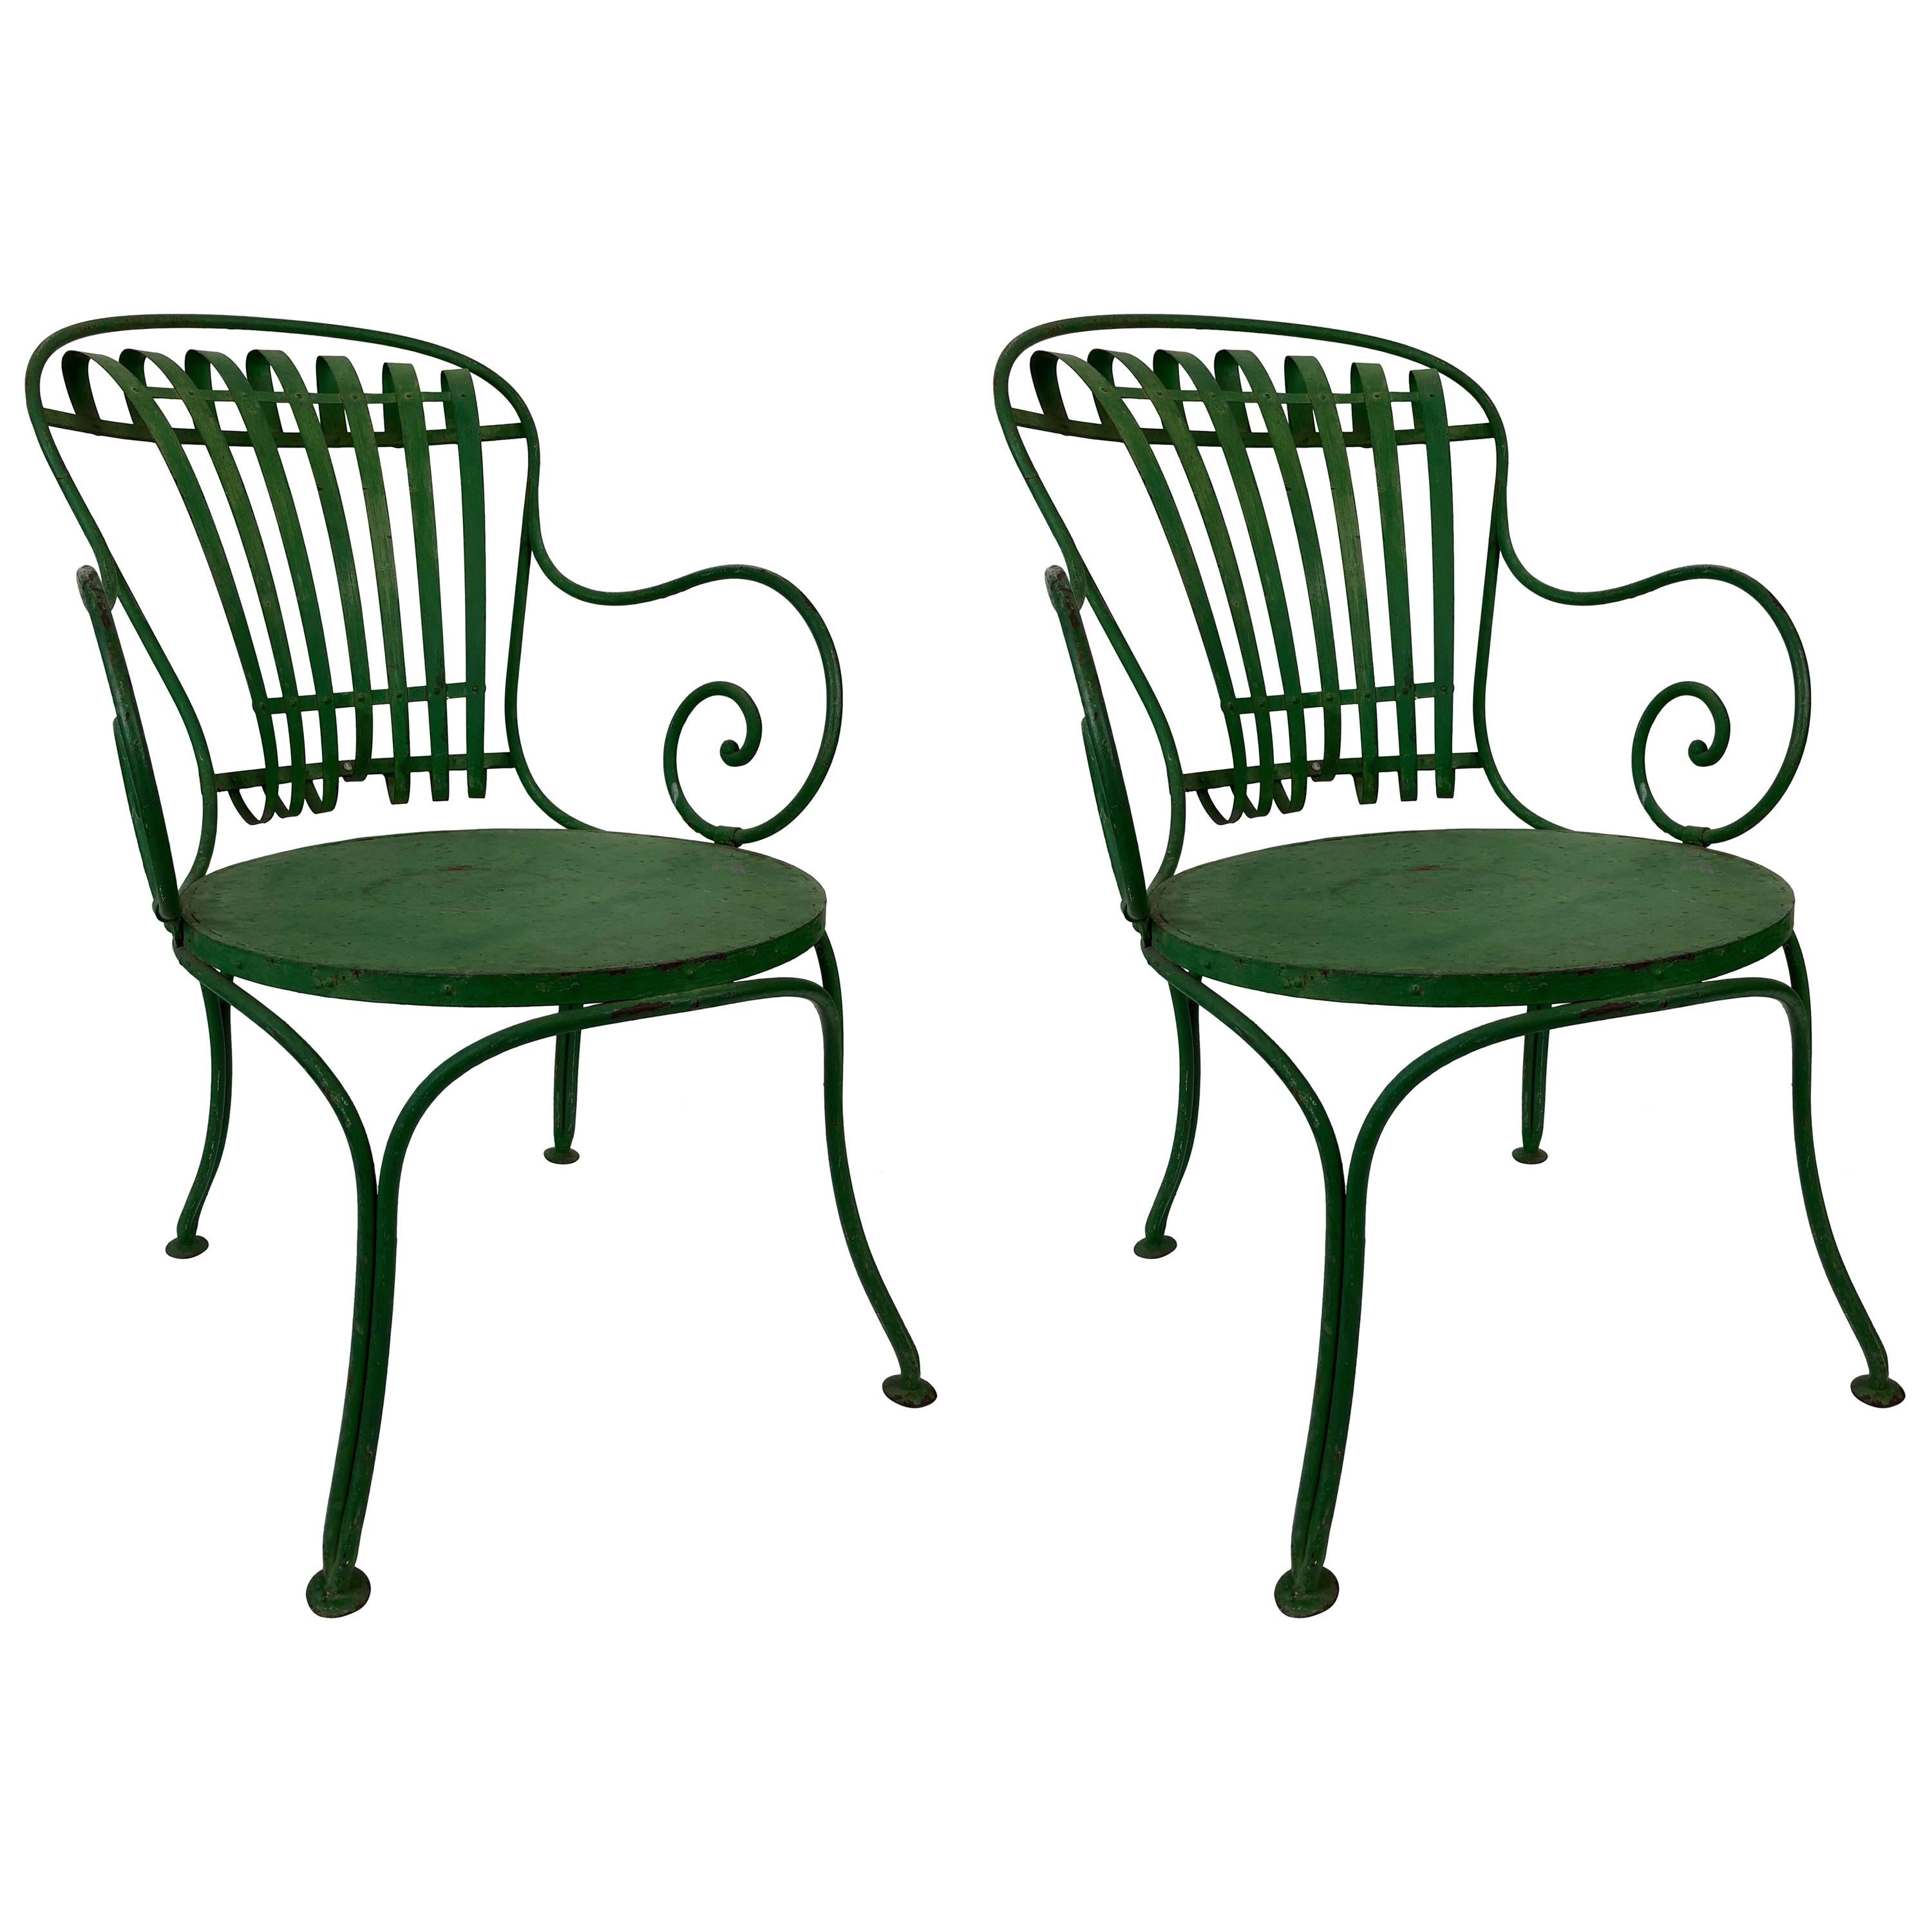 Pair of 1930s French Garden Chairs from Francois Carre